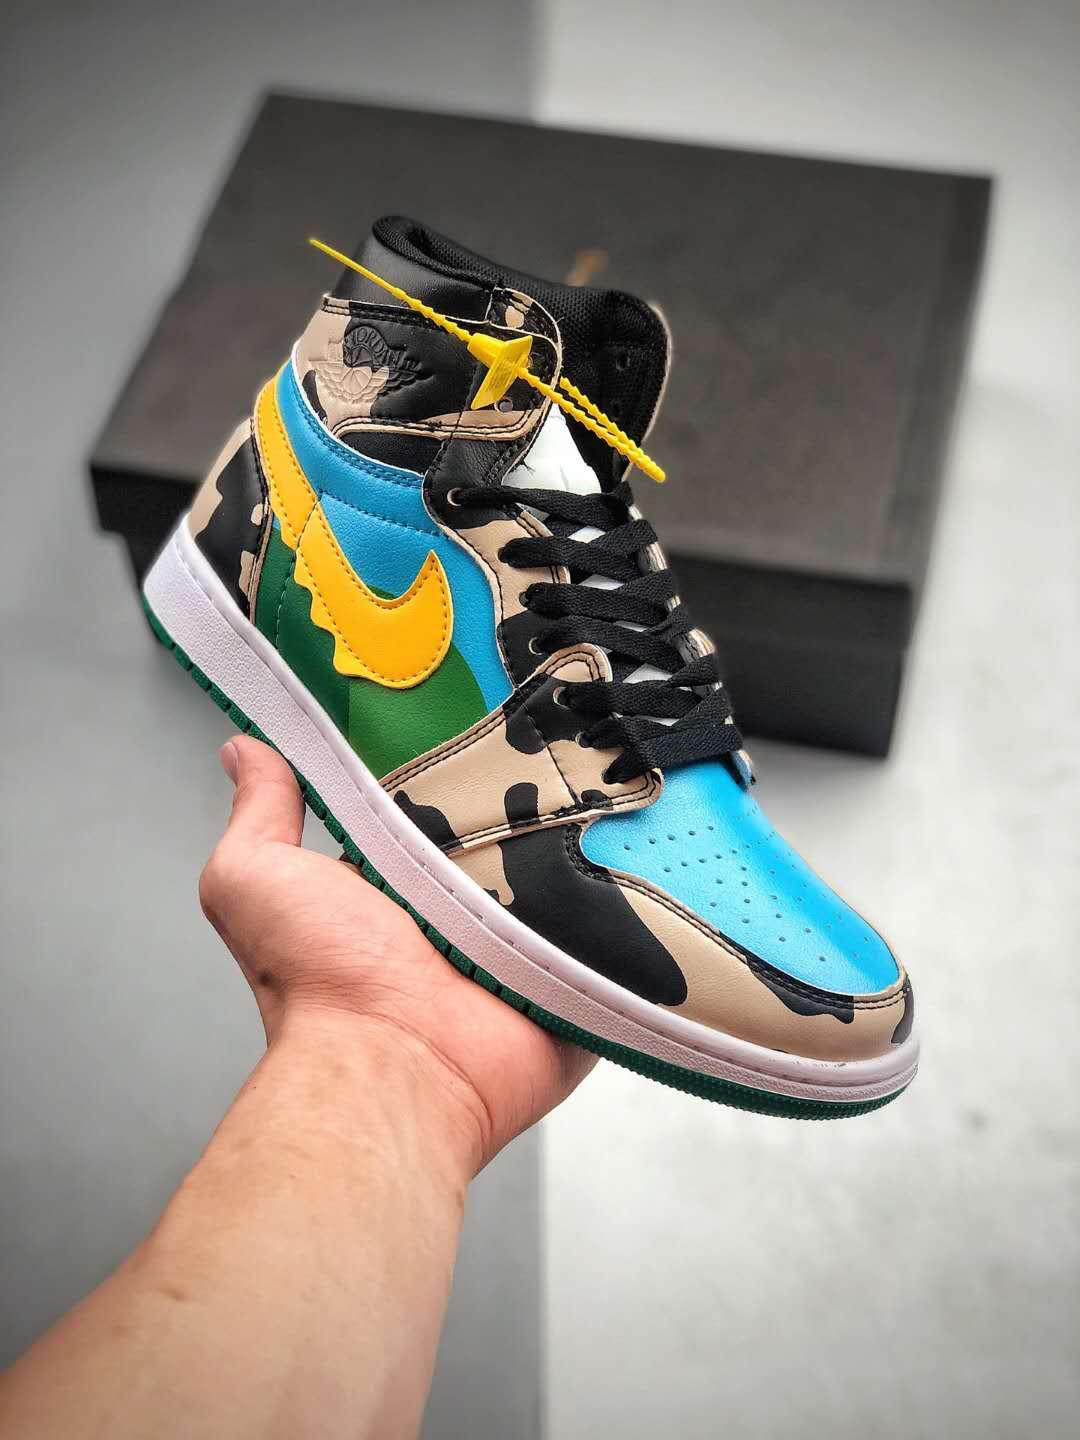 Nike Ben & Jerry's x Air Jordan 1 'Chunky Dunky' CU3244-100 | Limited Edition Sneakers